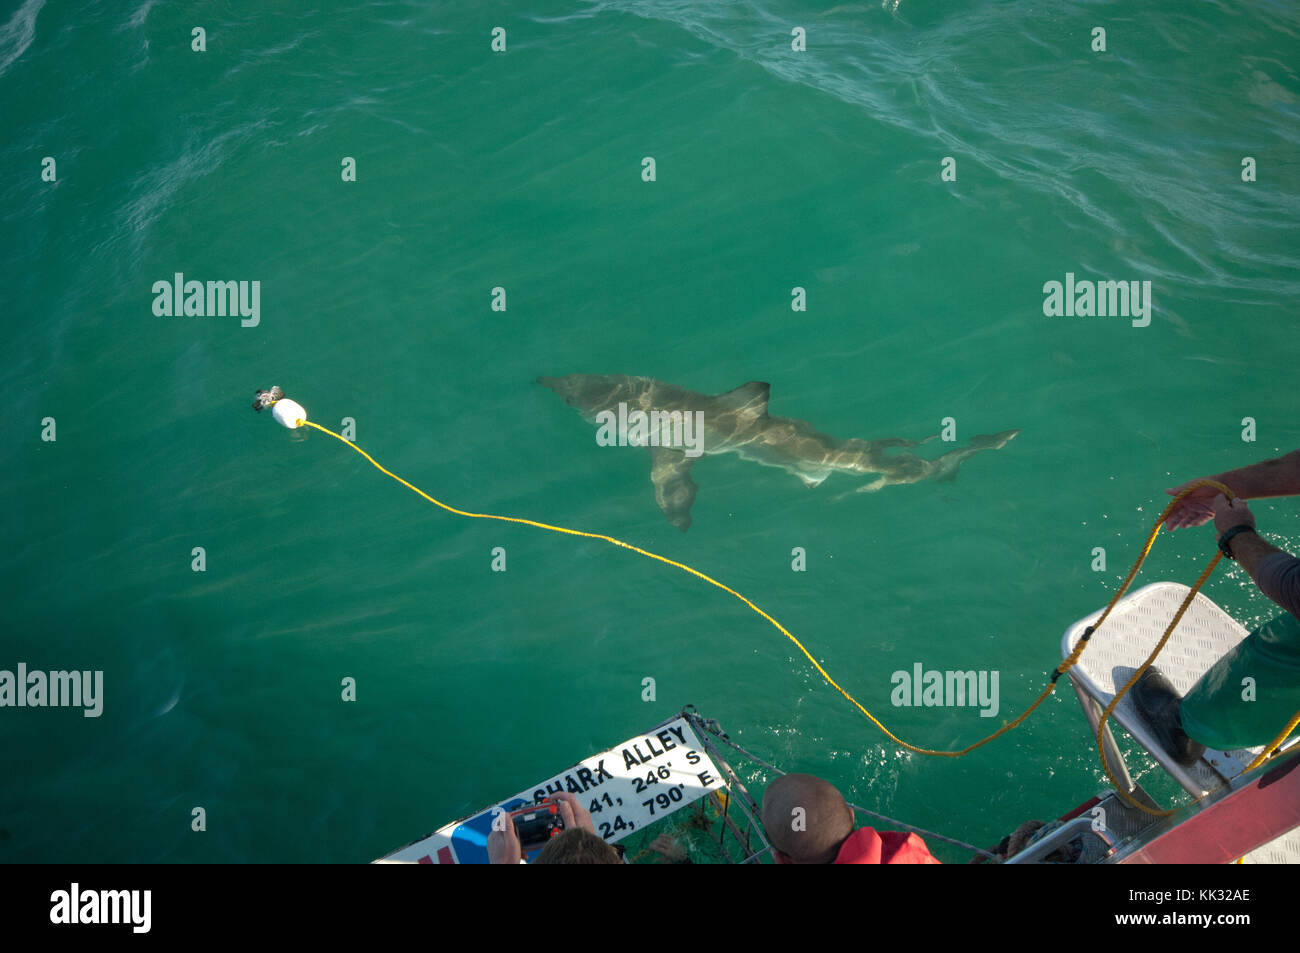 Great white shark snorkeling is a tourist attraction in South Africa. Stock Photo